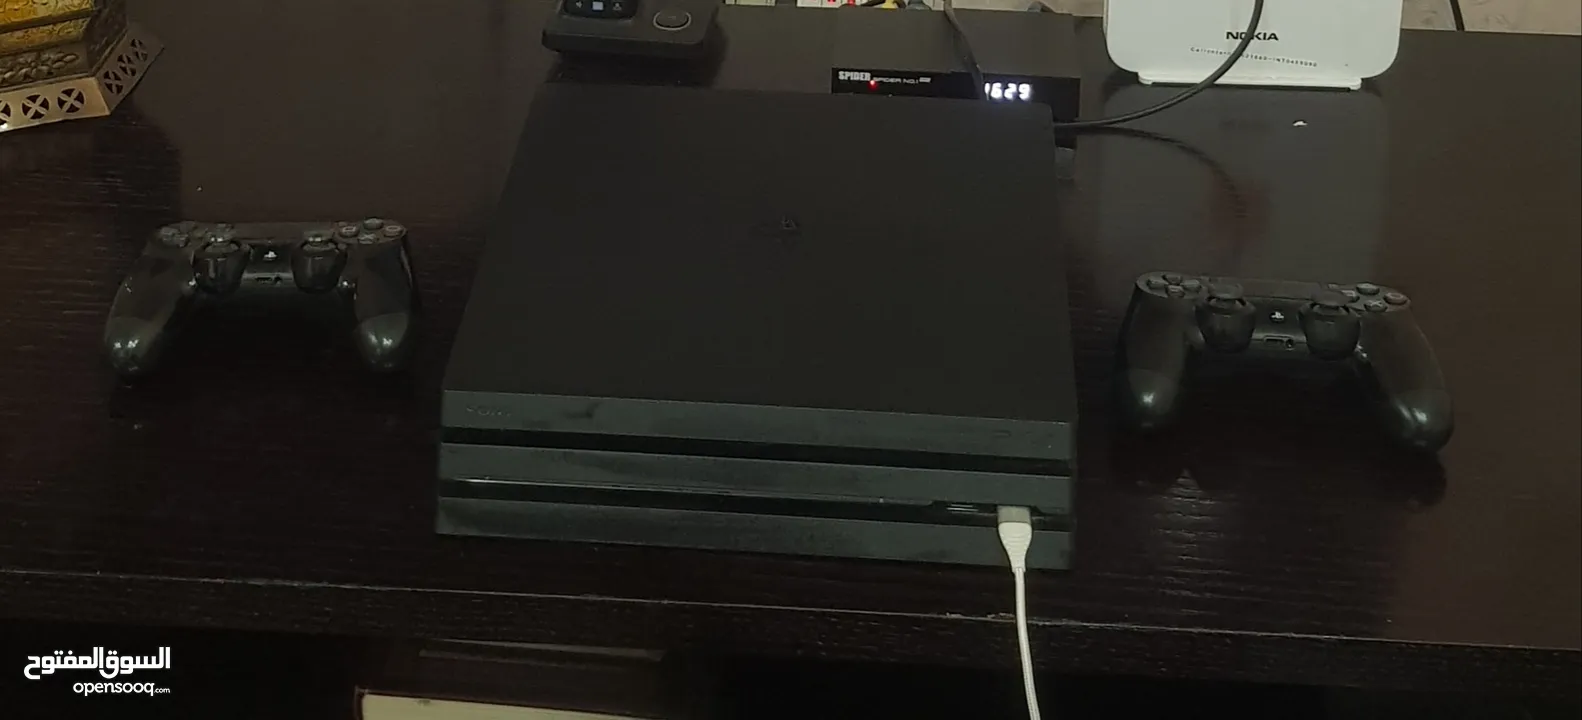 PS4 Pro + 2 Controllers + CDs